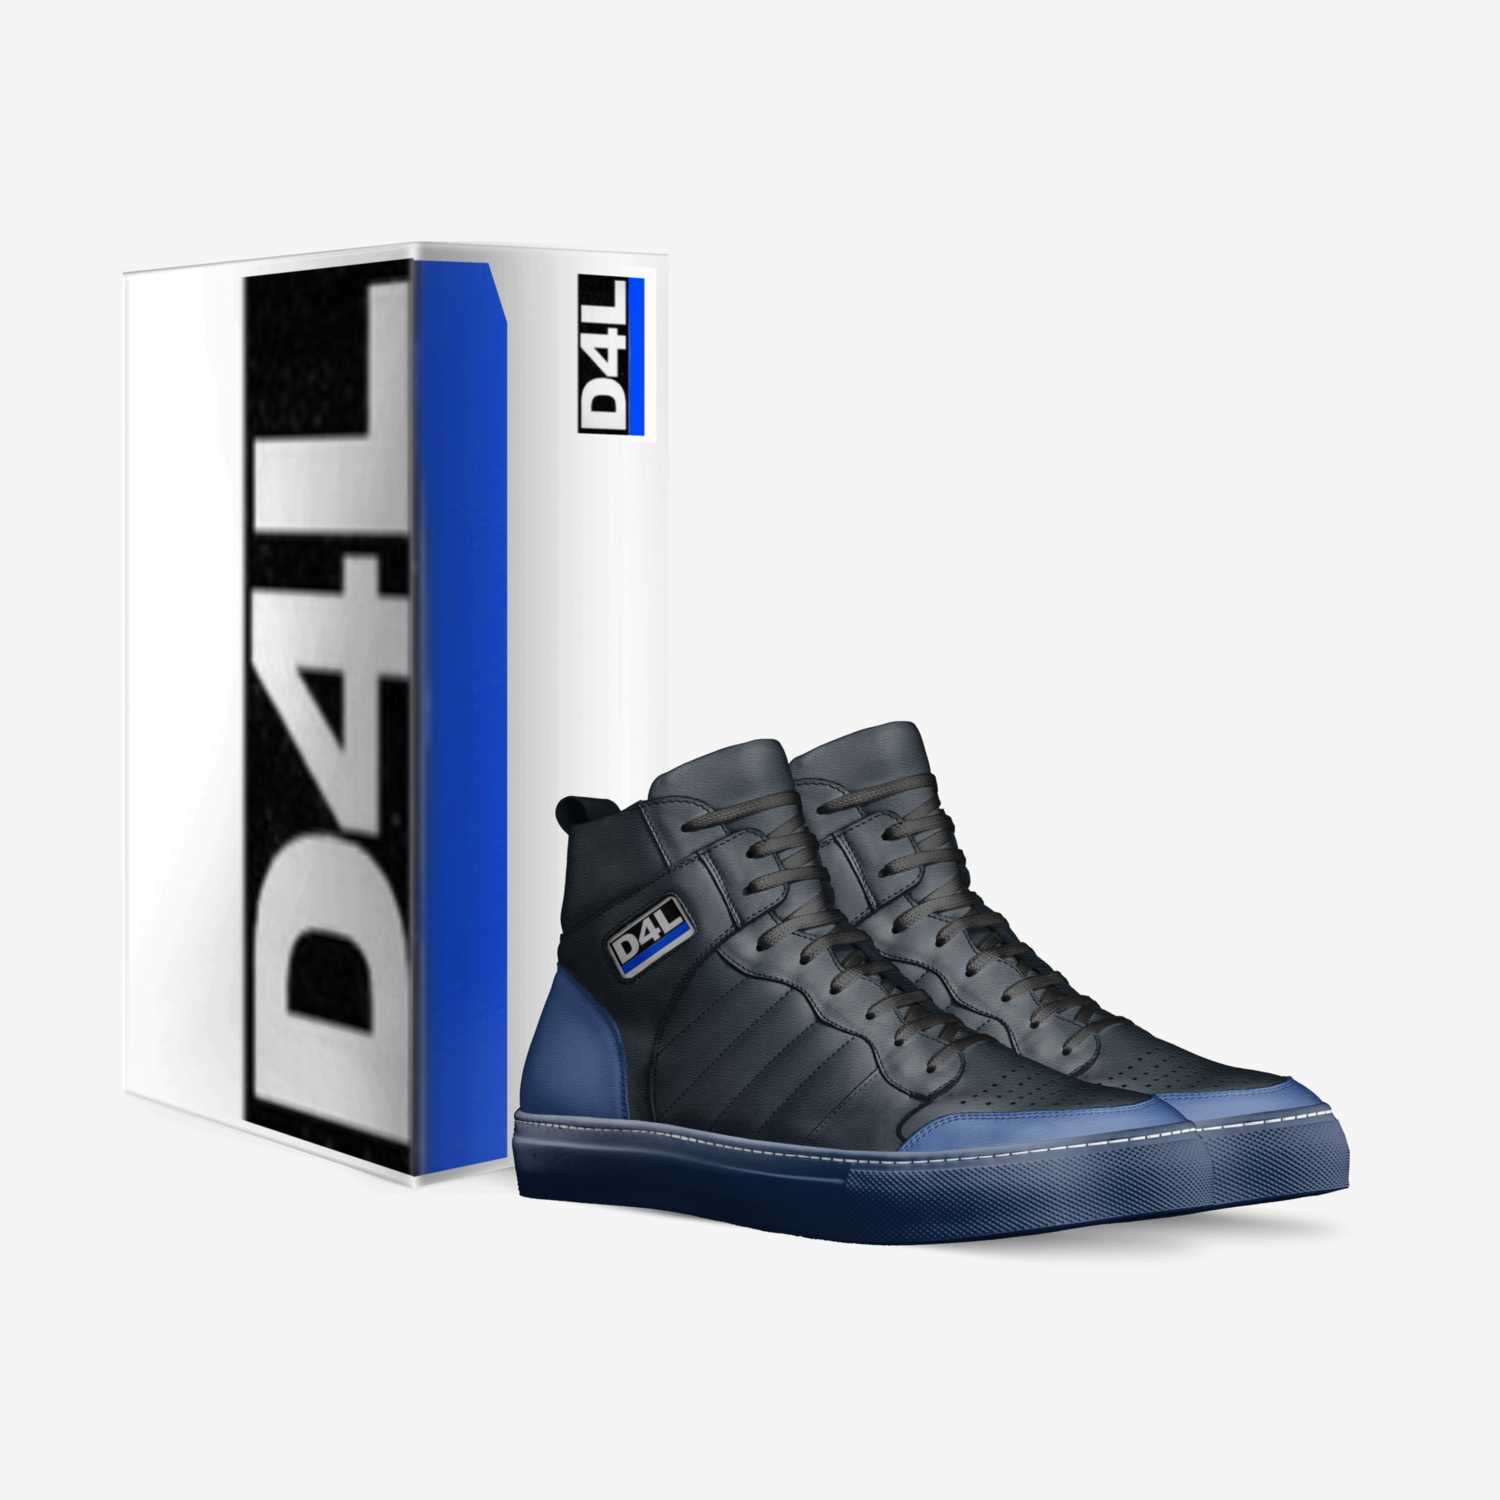 D4L custom made in Italy shoes by Shannon Lance | Box view